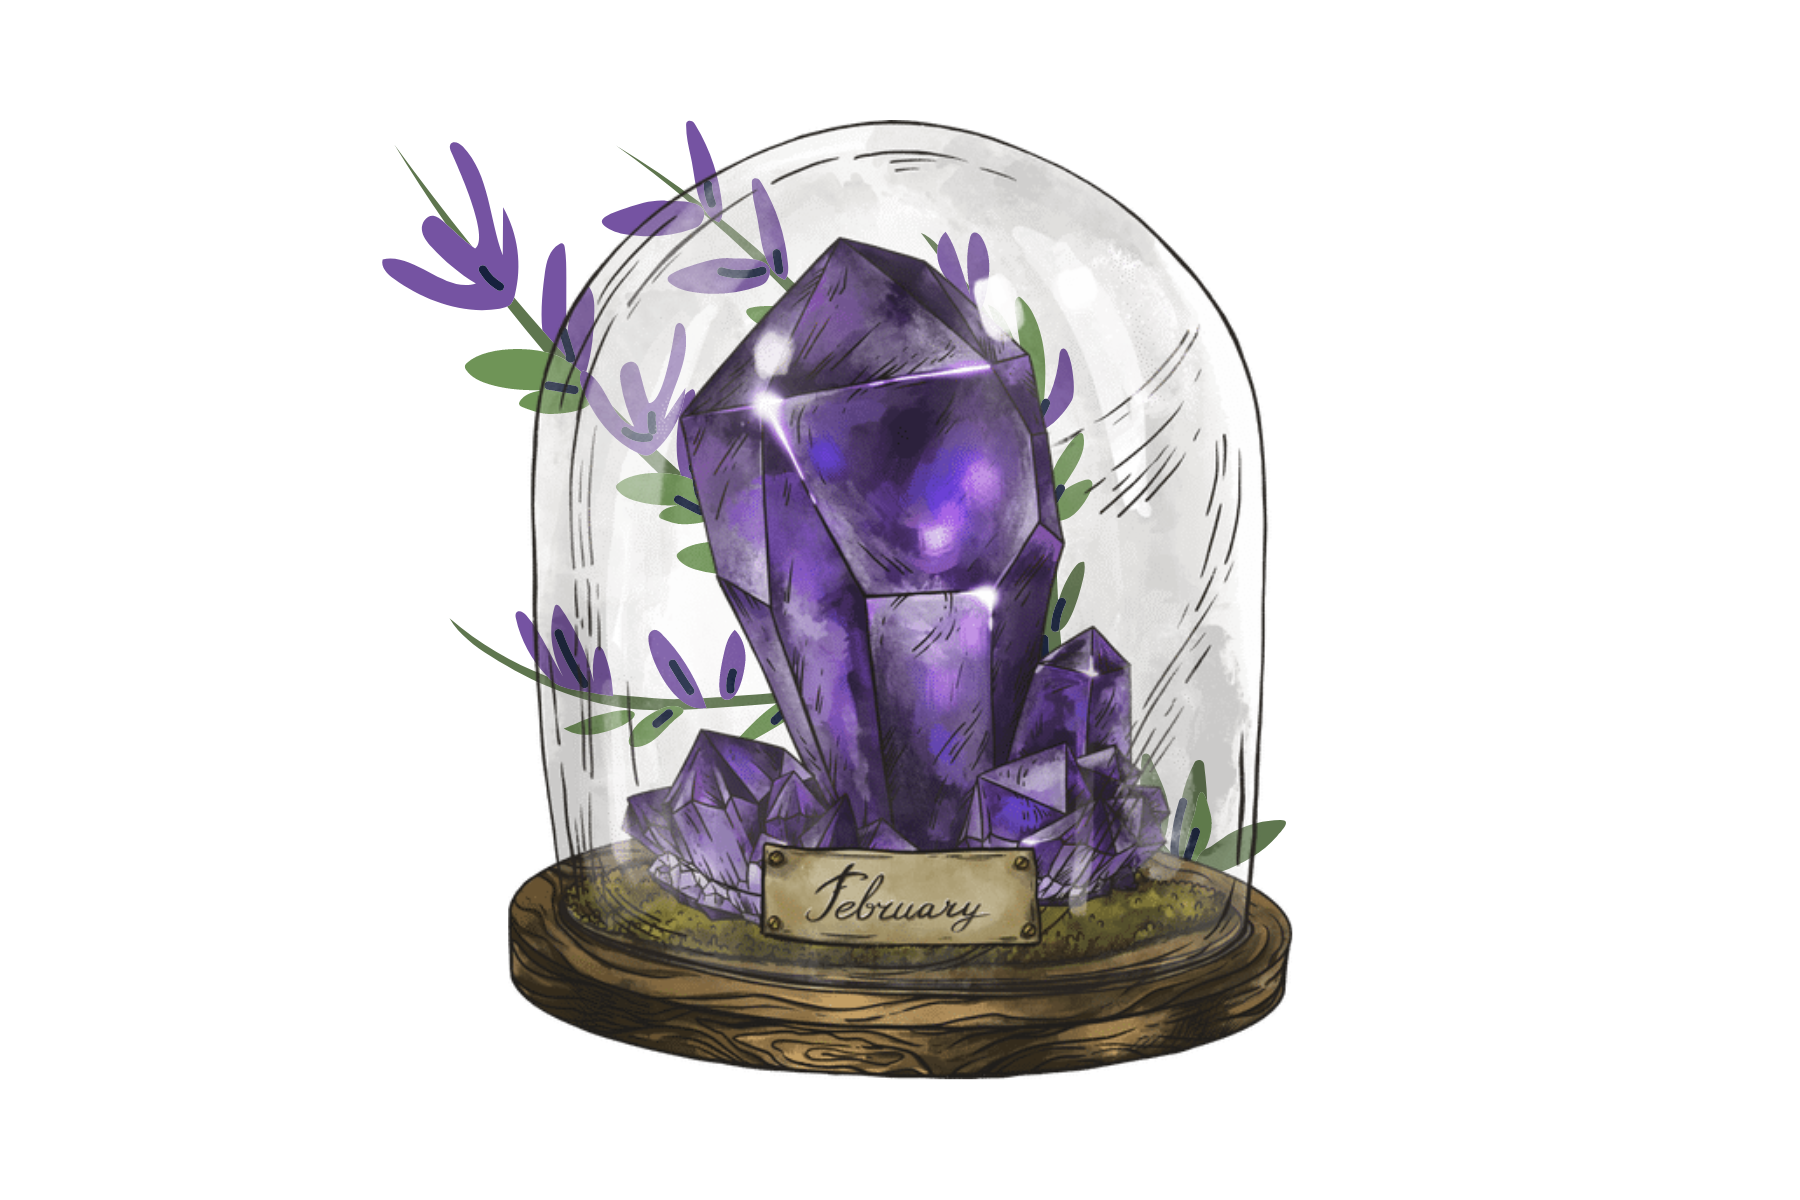 Amethyst in a glass jar with leaves on the outside